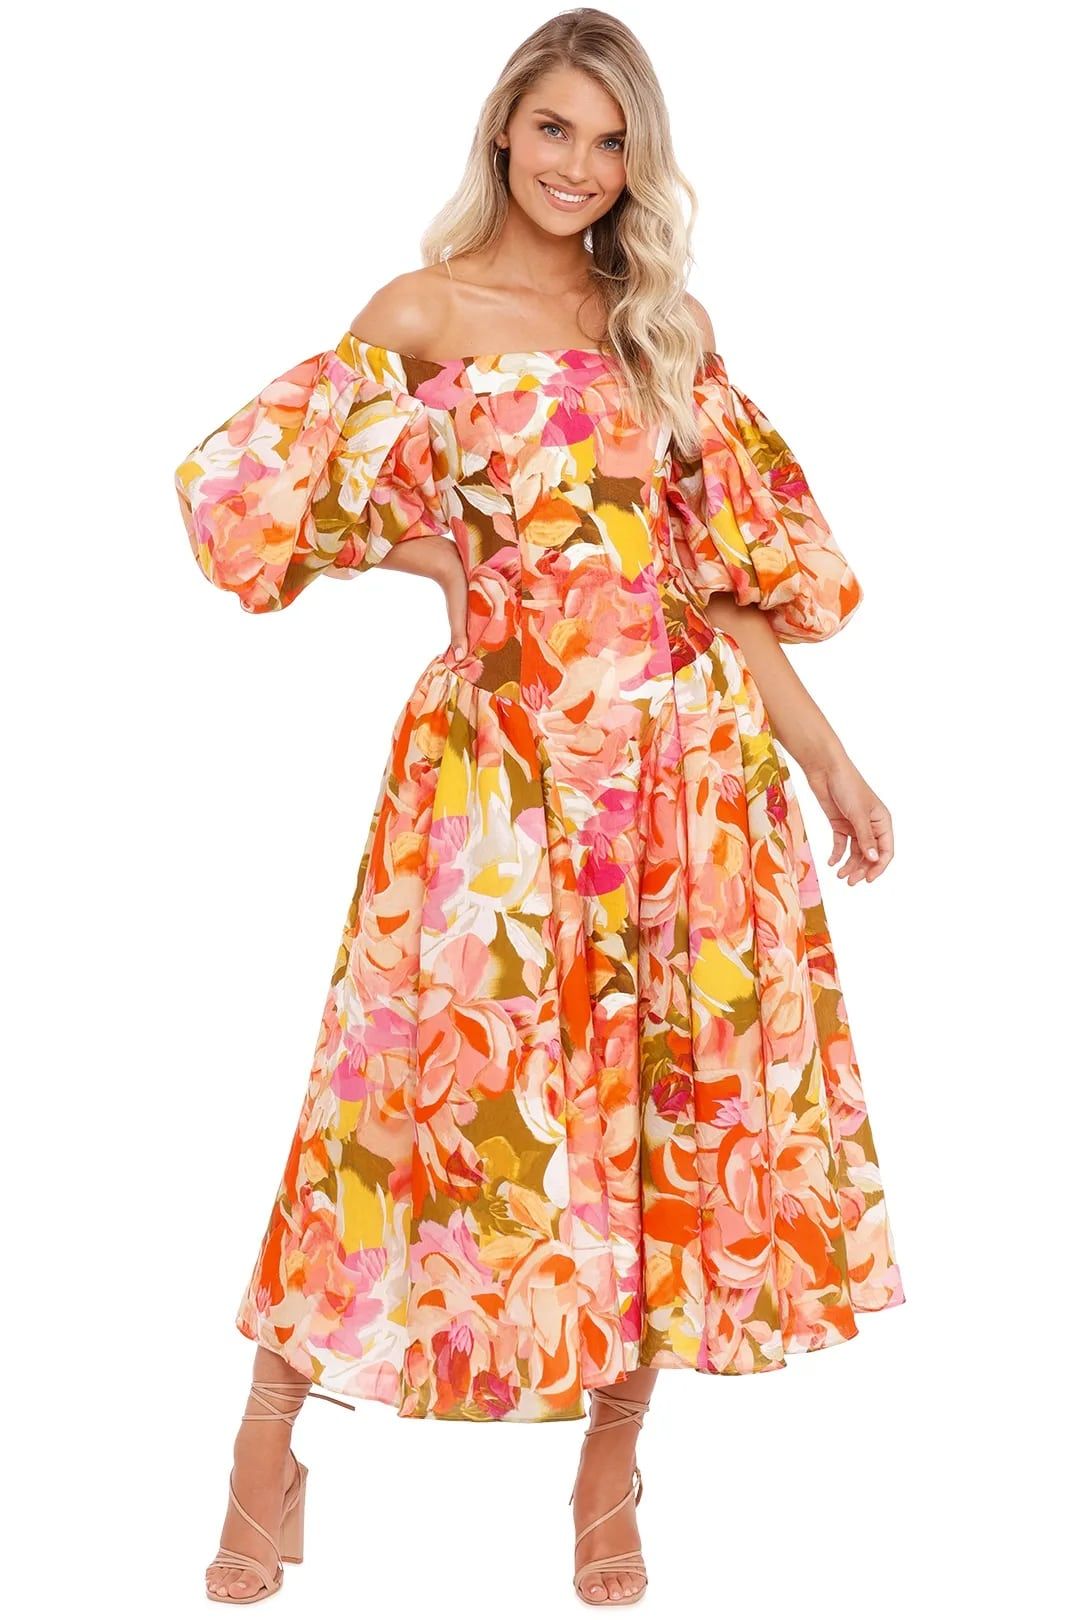 Hire Porter dress in pink bouquet for wedding guests.